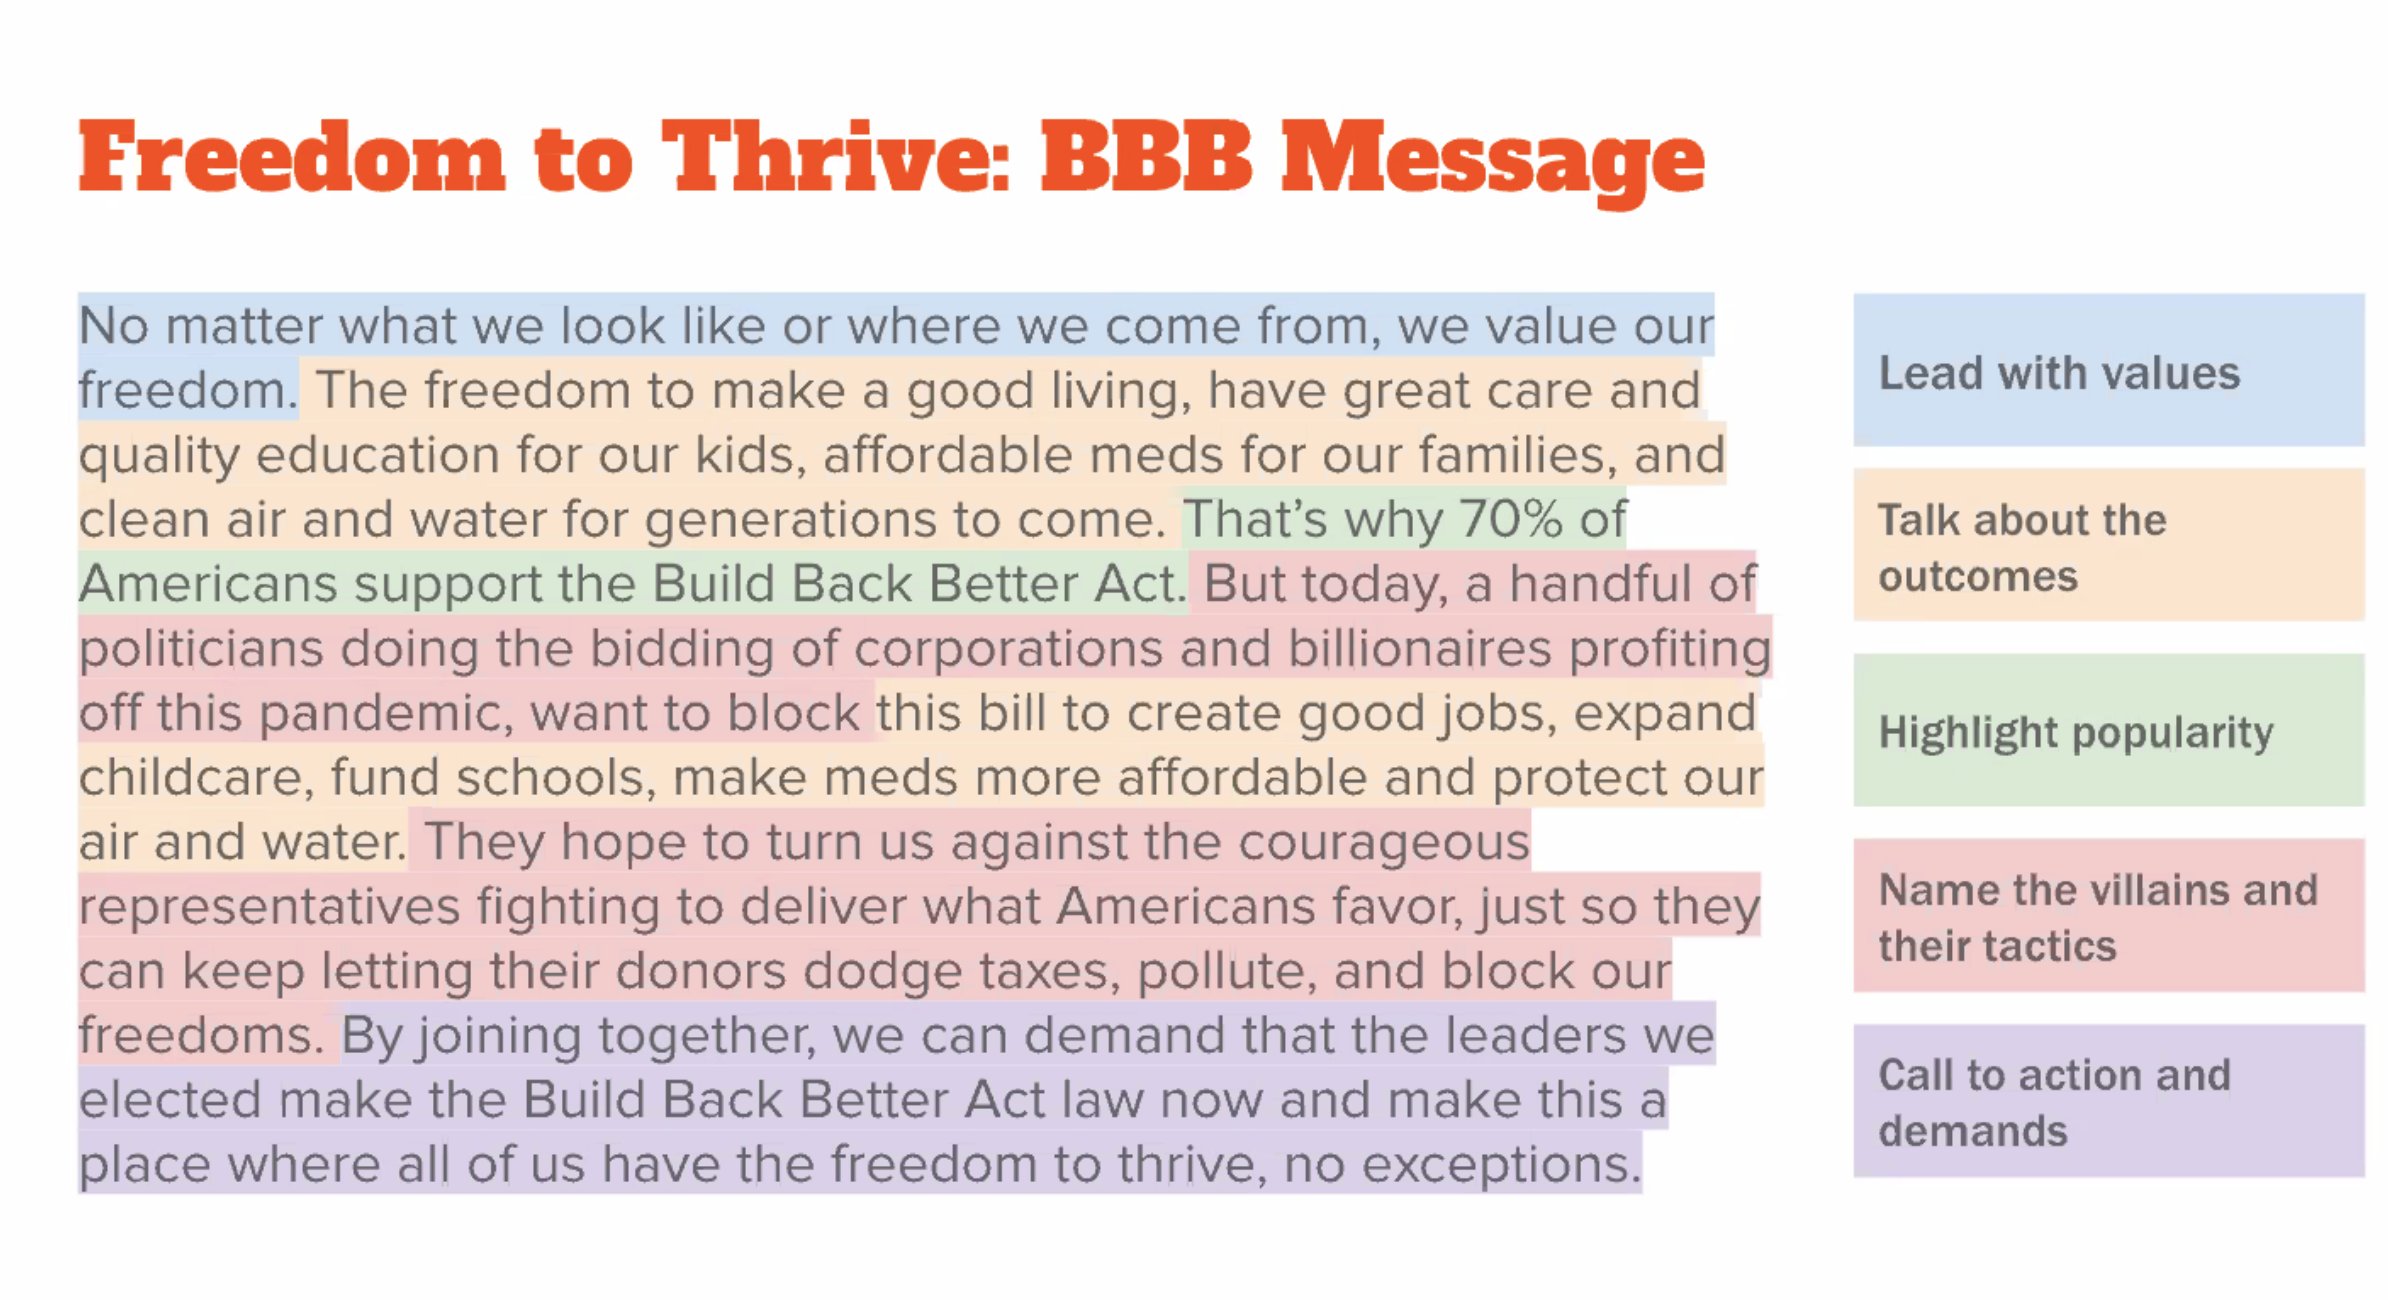 Freedom to Thrive is an example of how ASO Communications recommends framing messages.